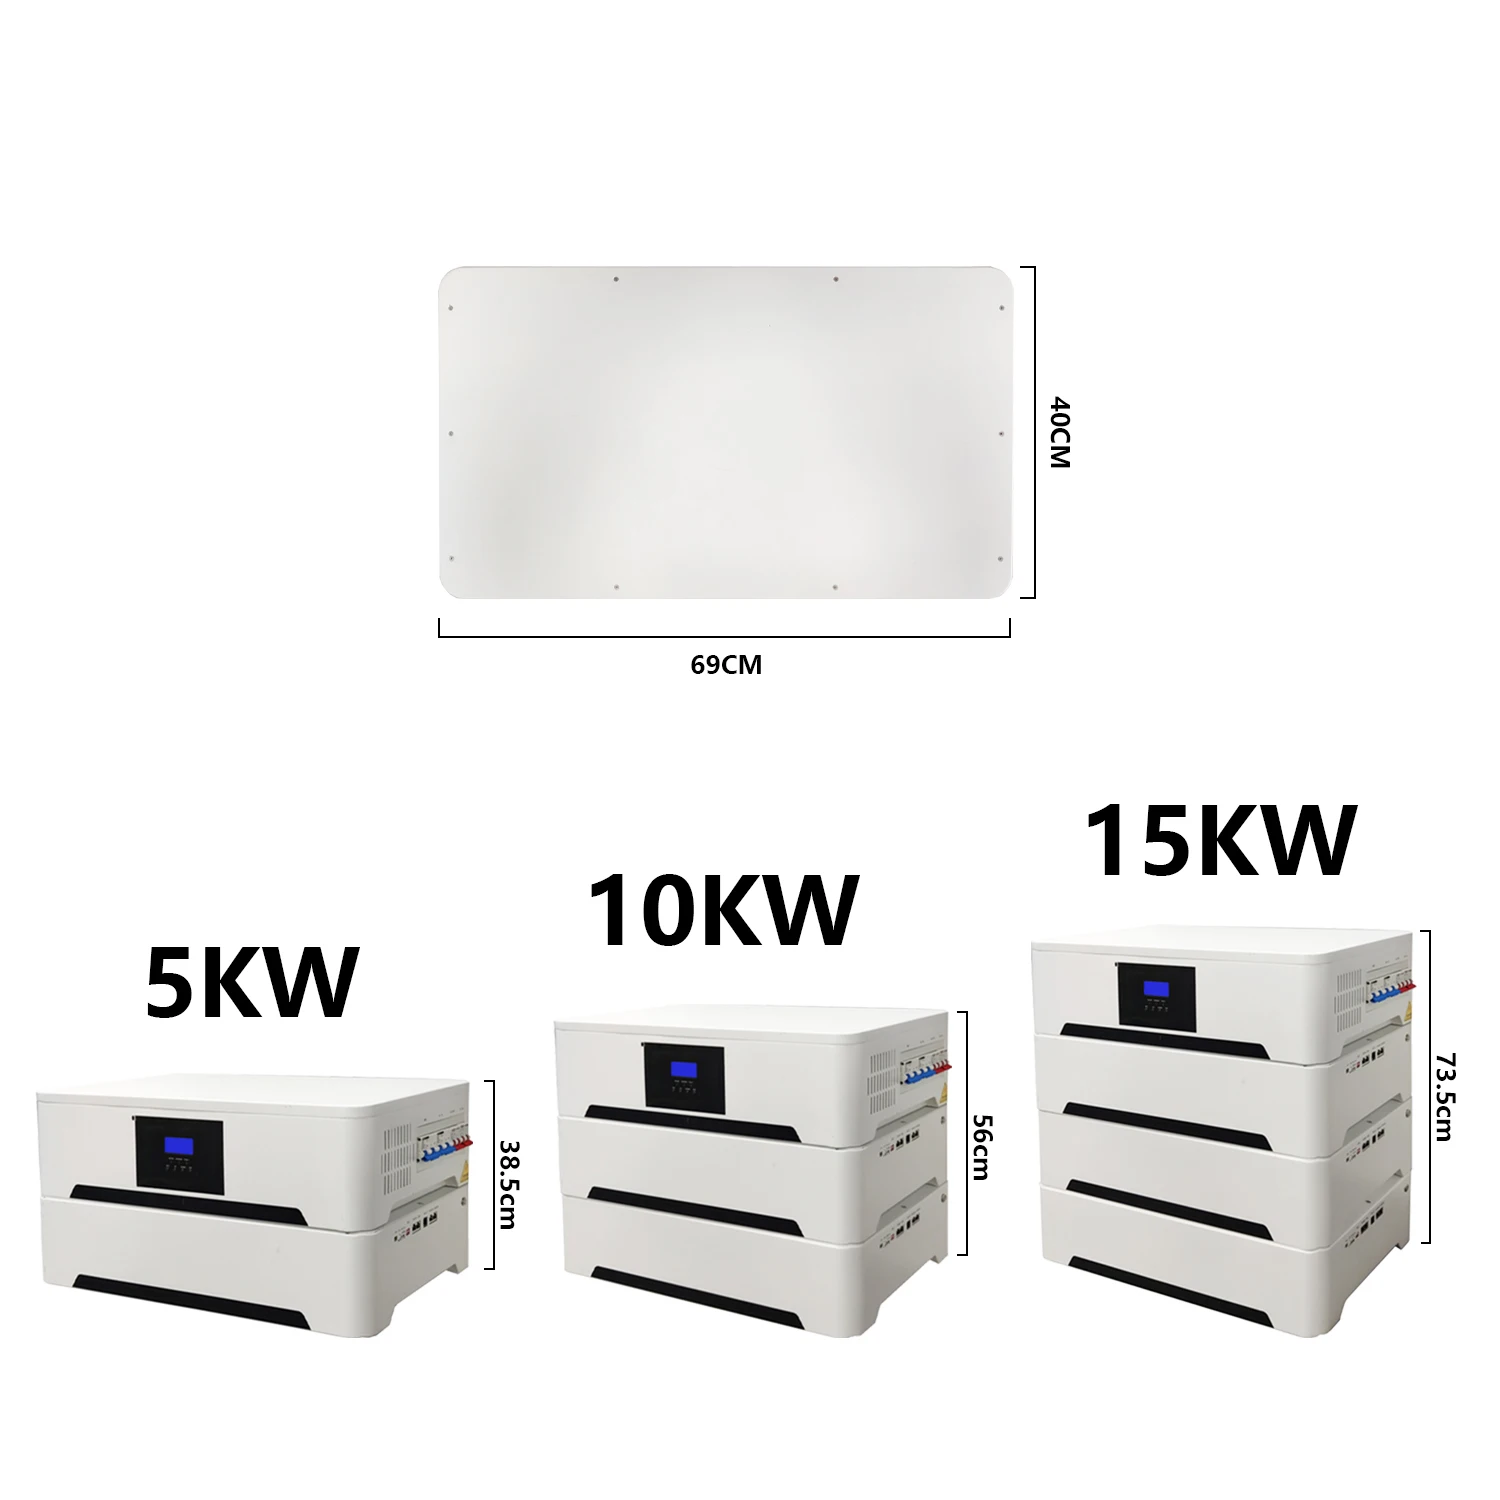 15kw lithium battery